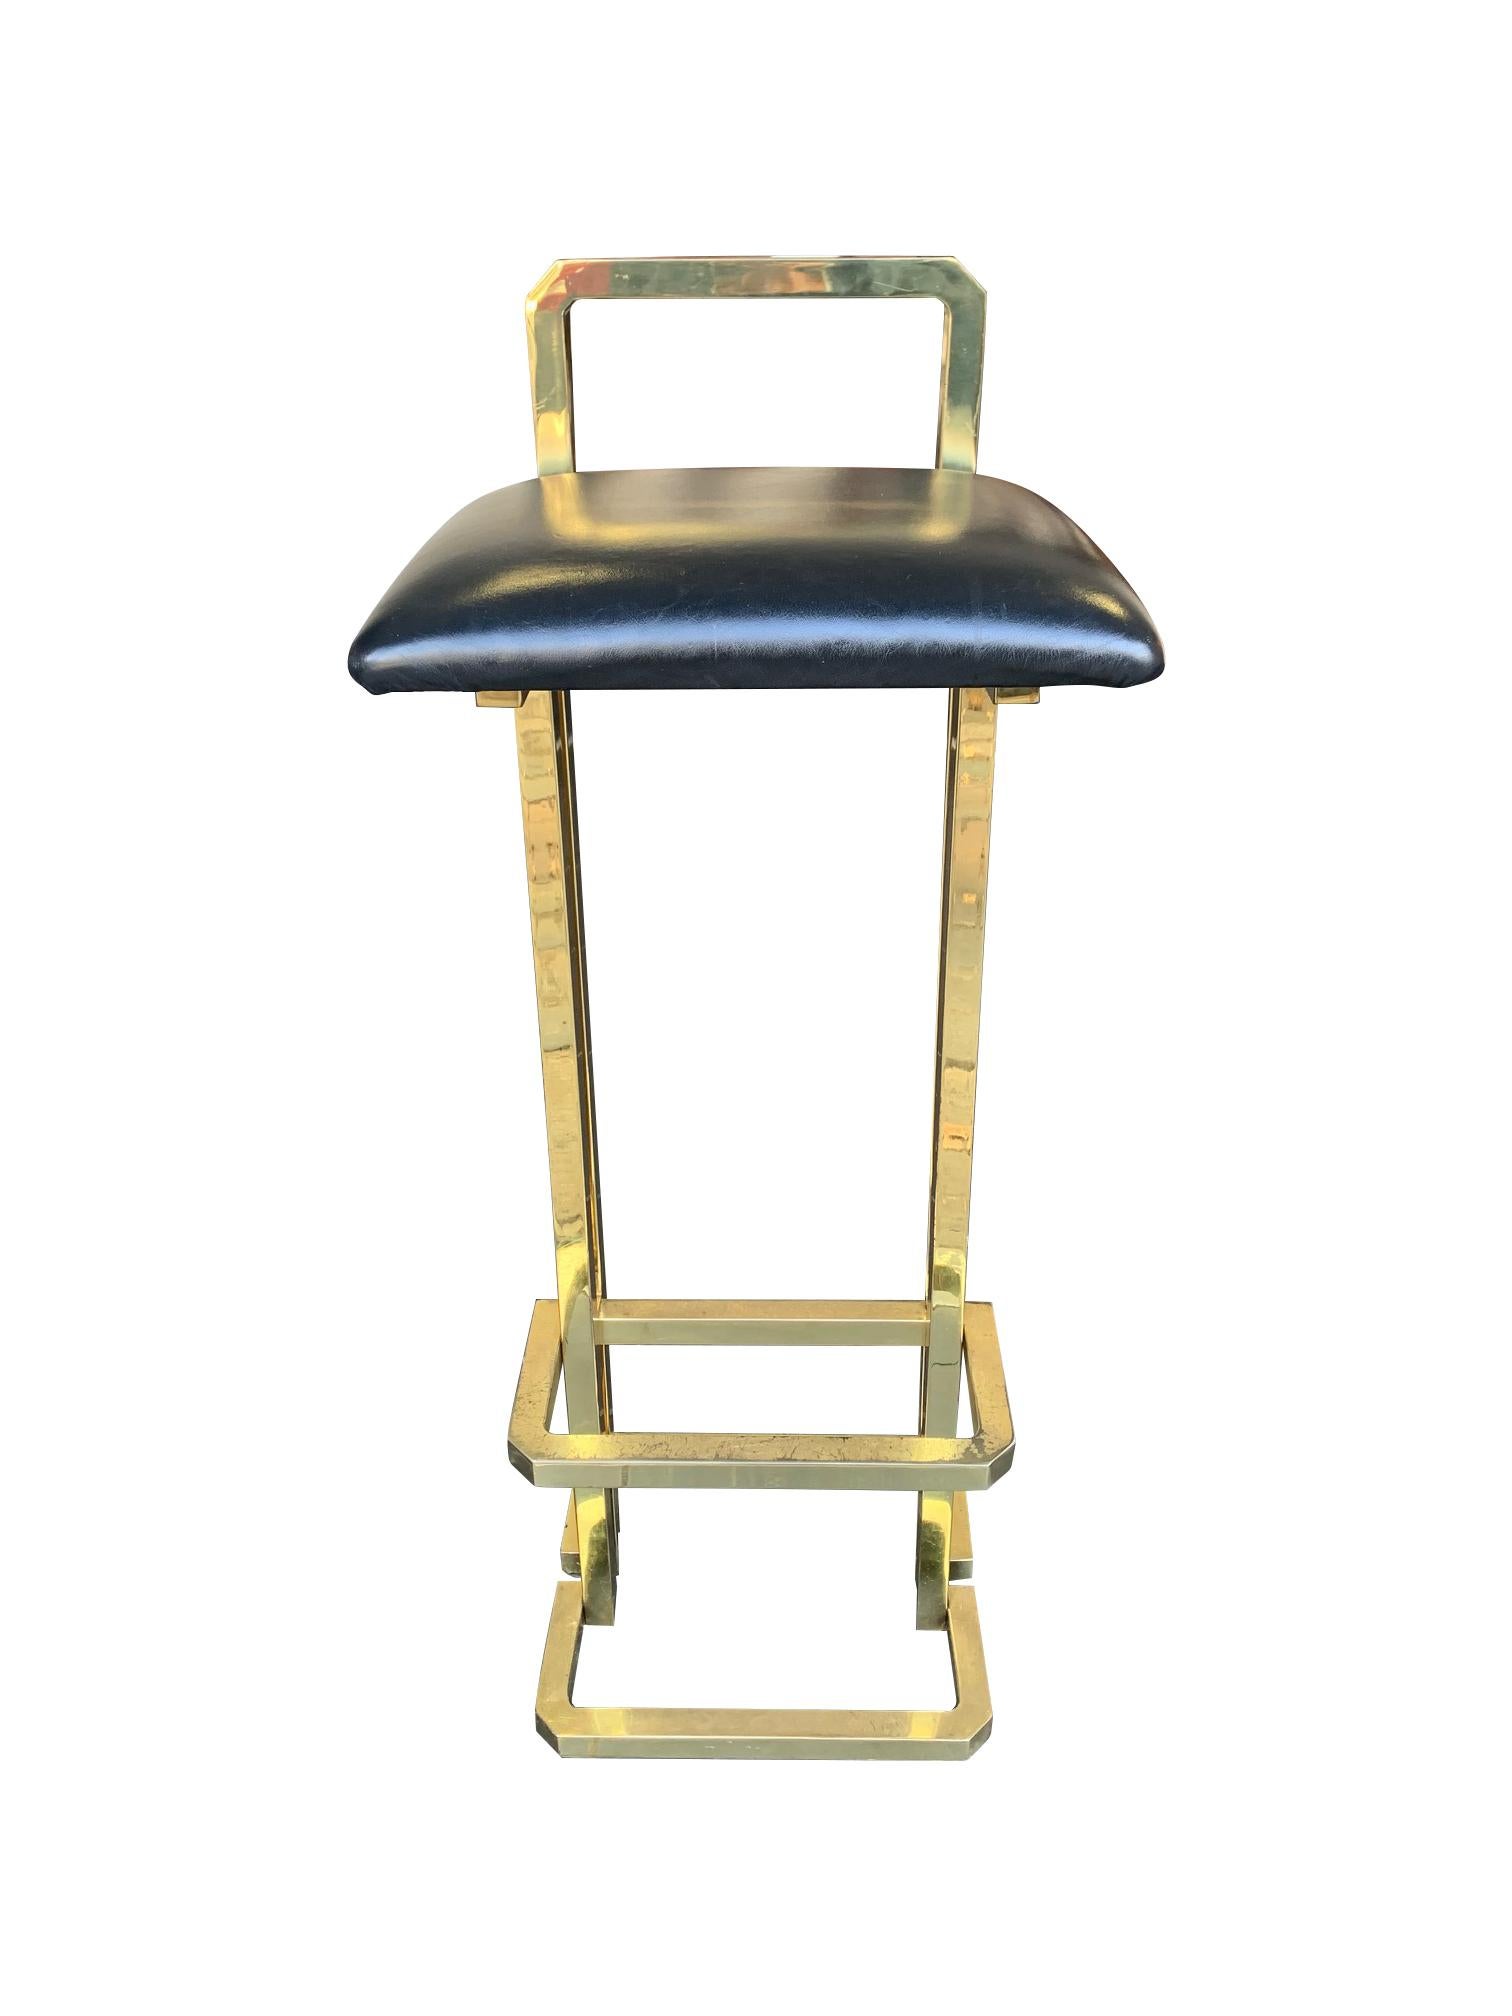 French Set of 3 Maison Jansen Style Gilt Metal Stools with Black Leather Seat Pads For Sale